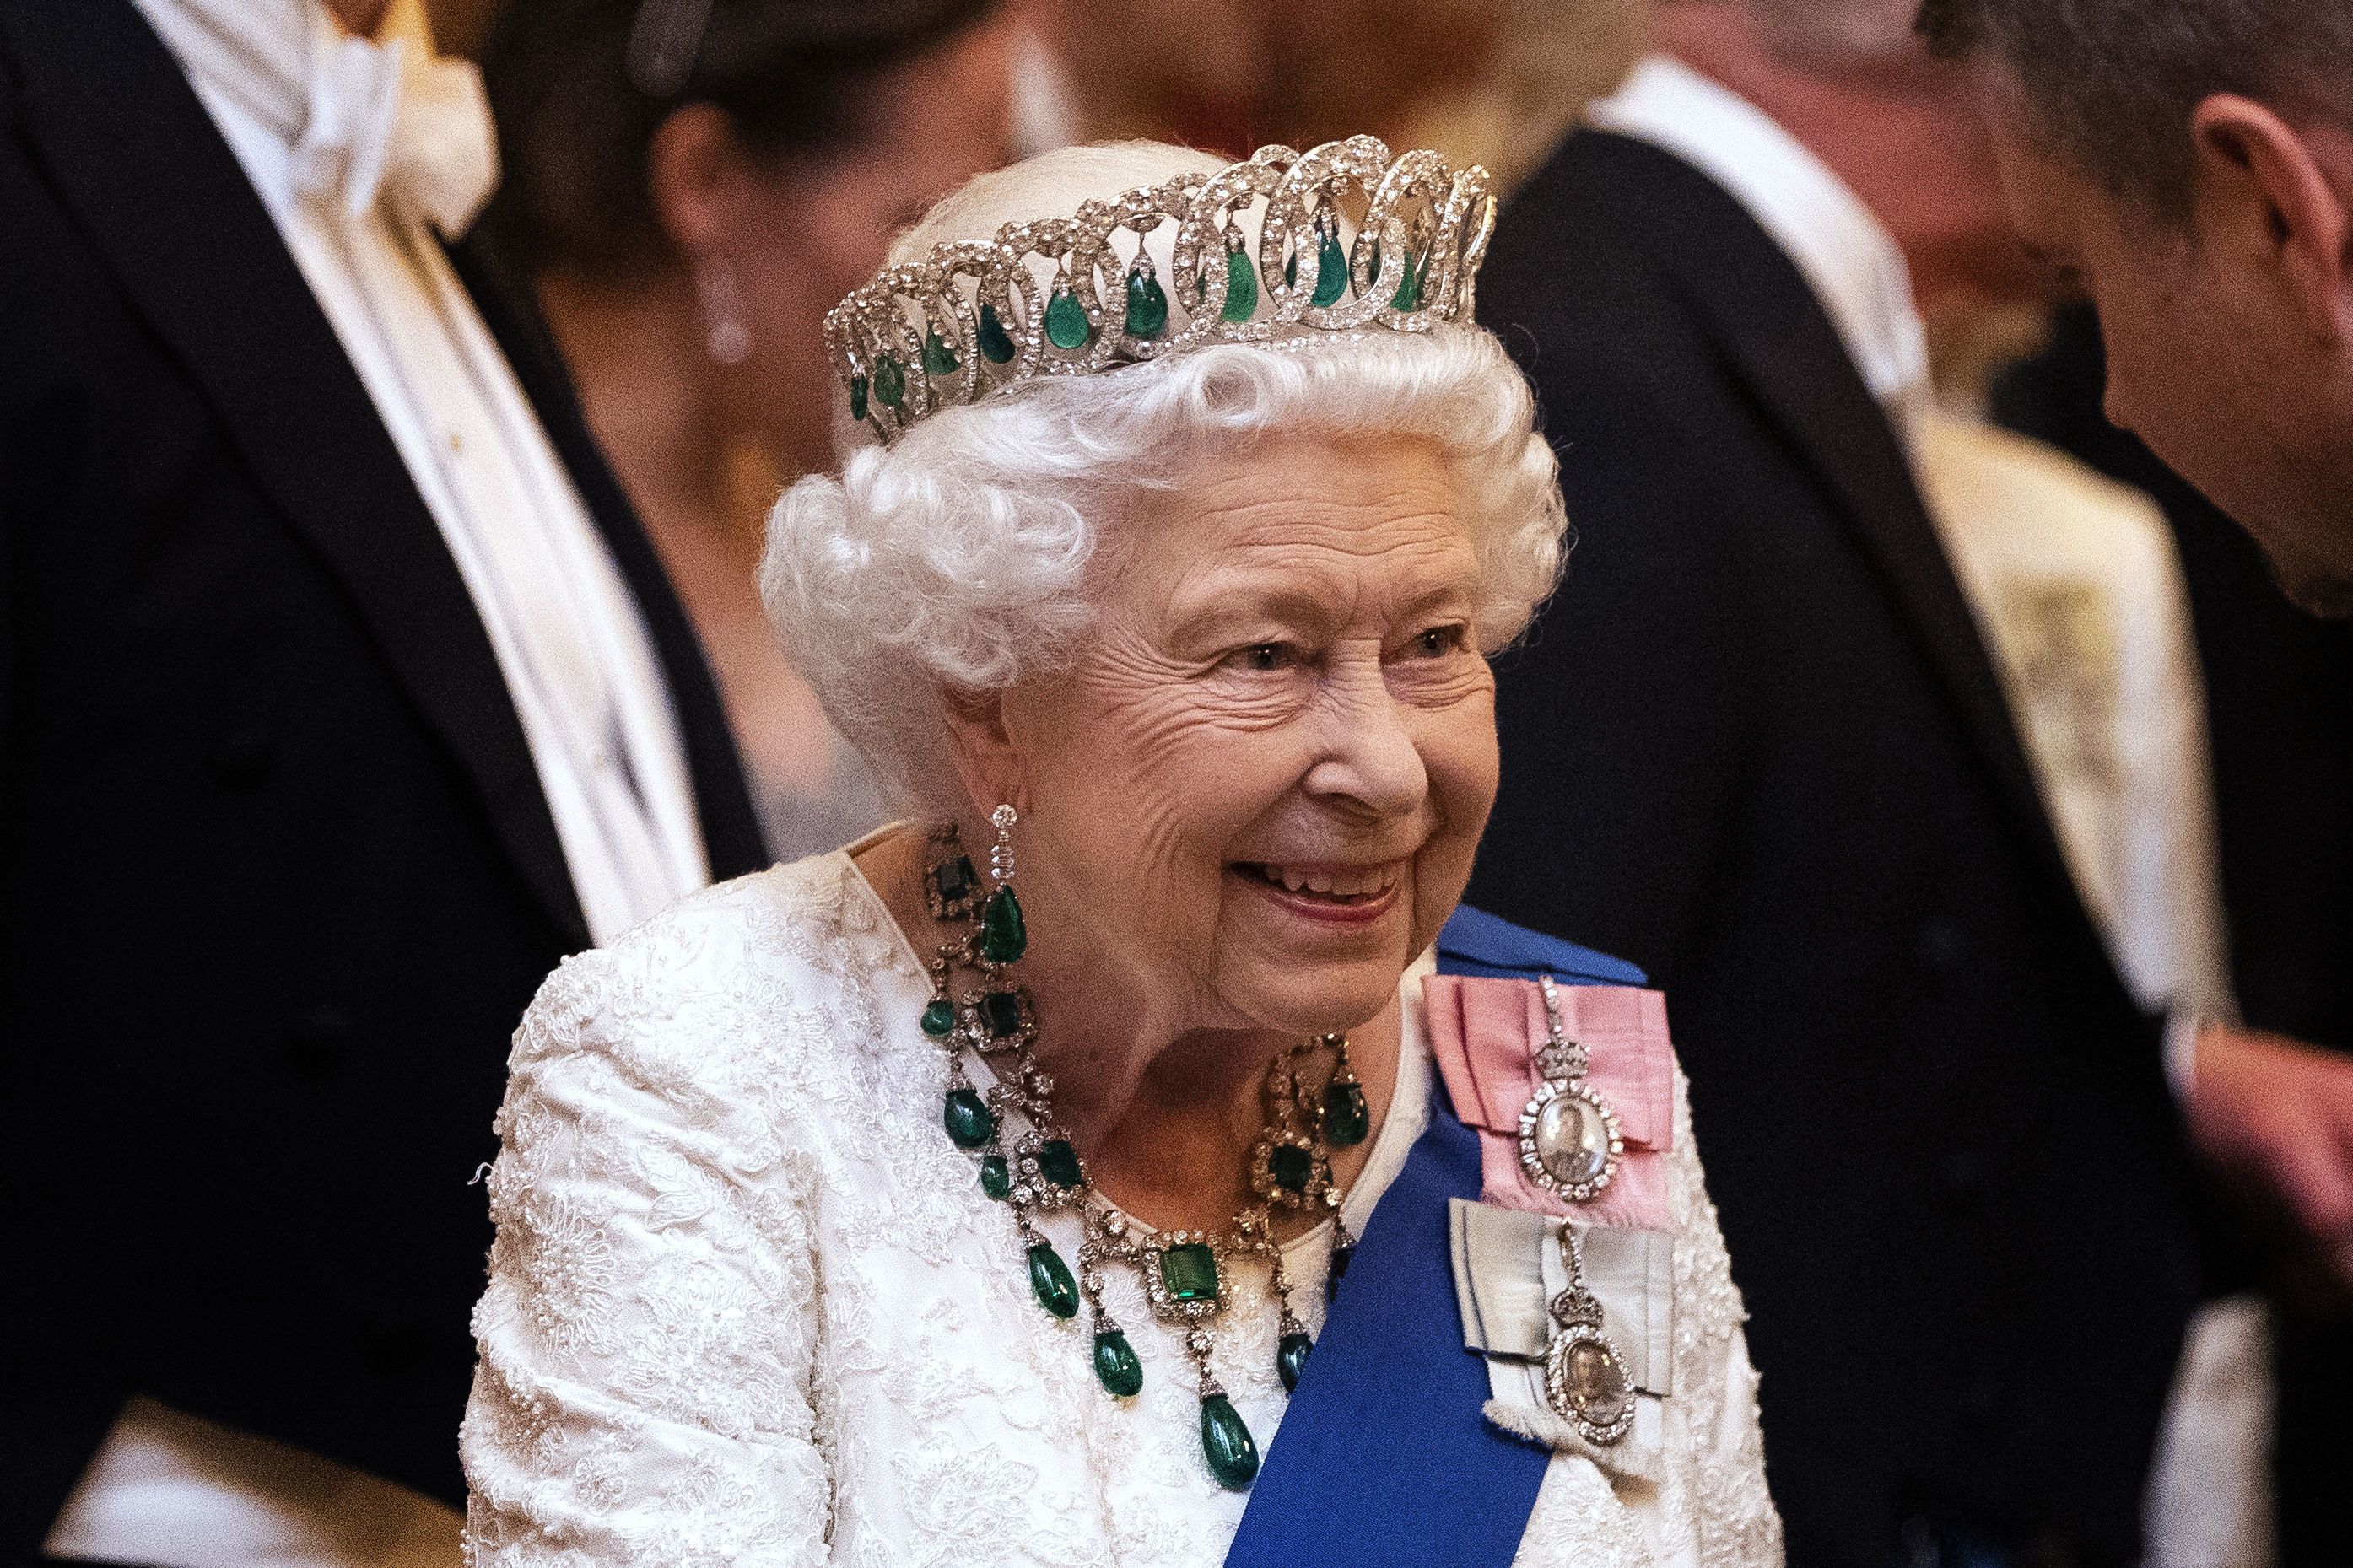 How to watch the Queen's history-making VE Day speech